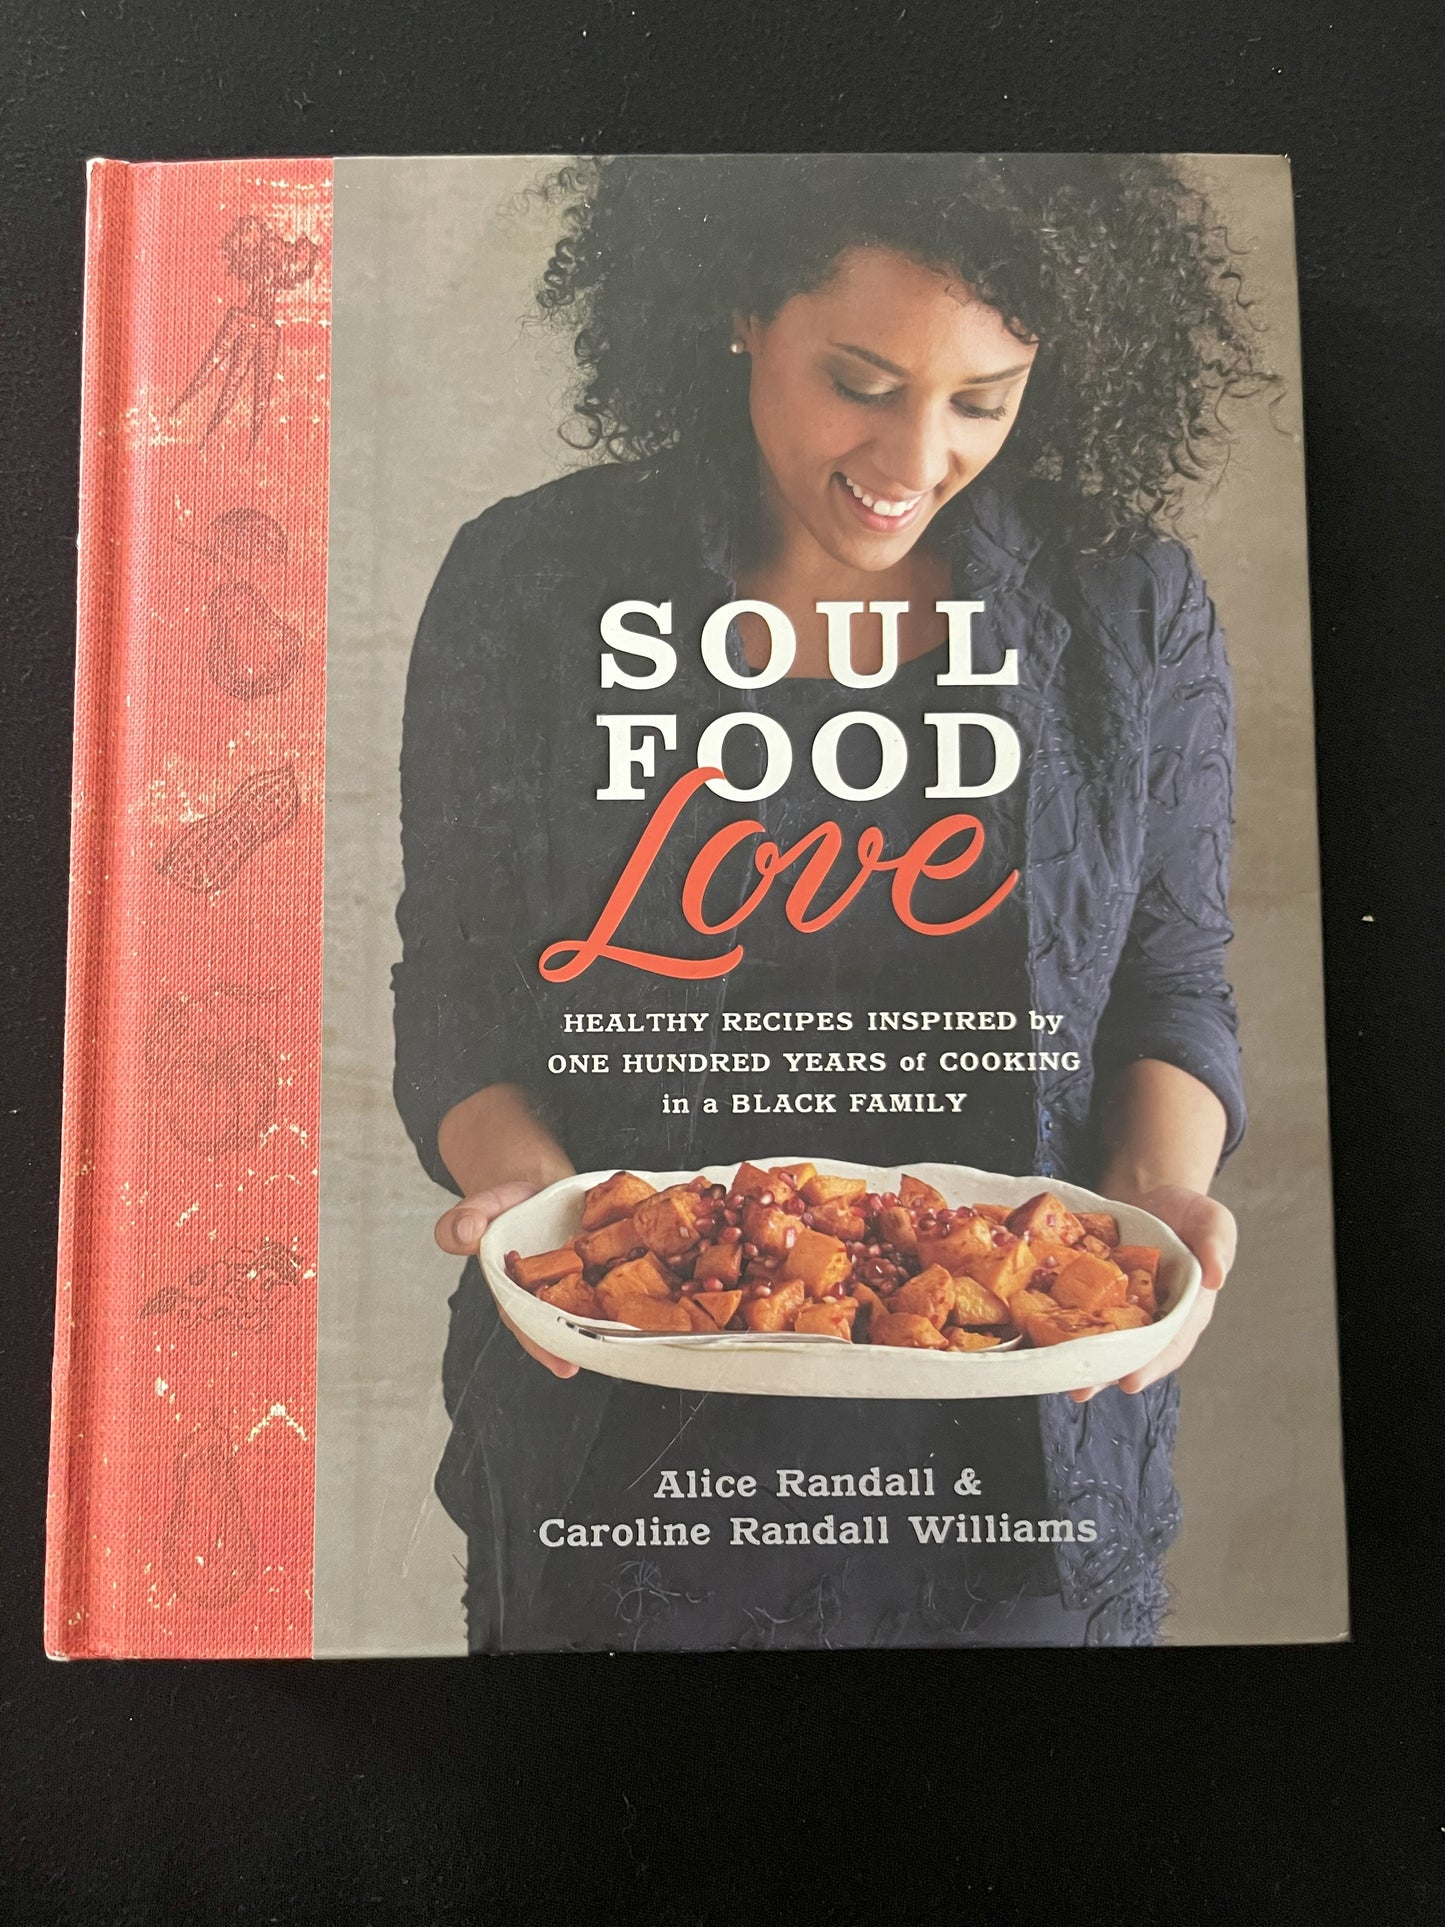 SOUL FOOD LOVE by Alice Randall and Caroline Randall Williams